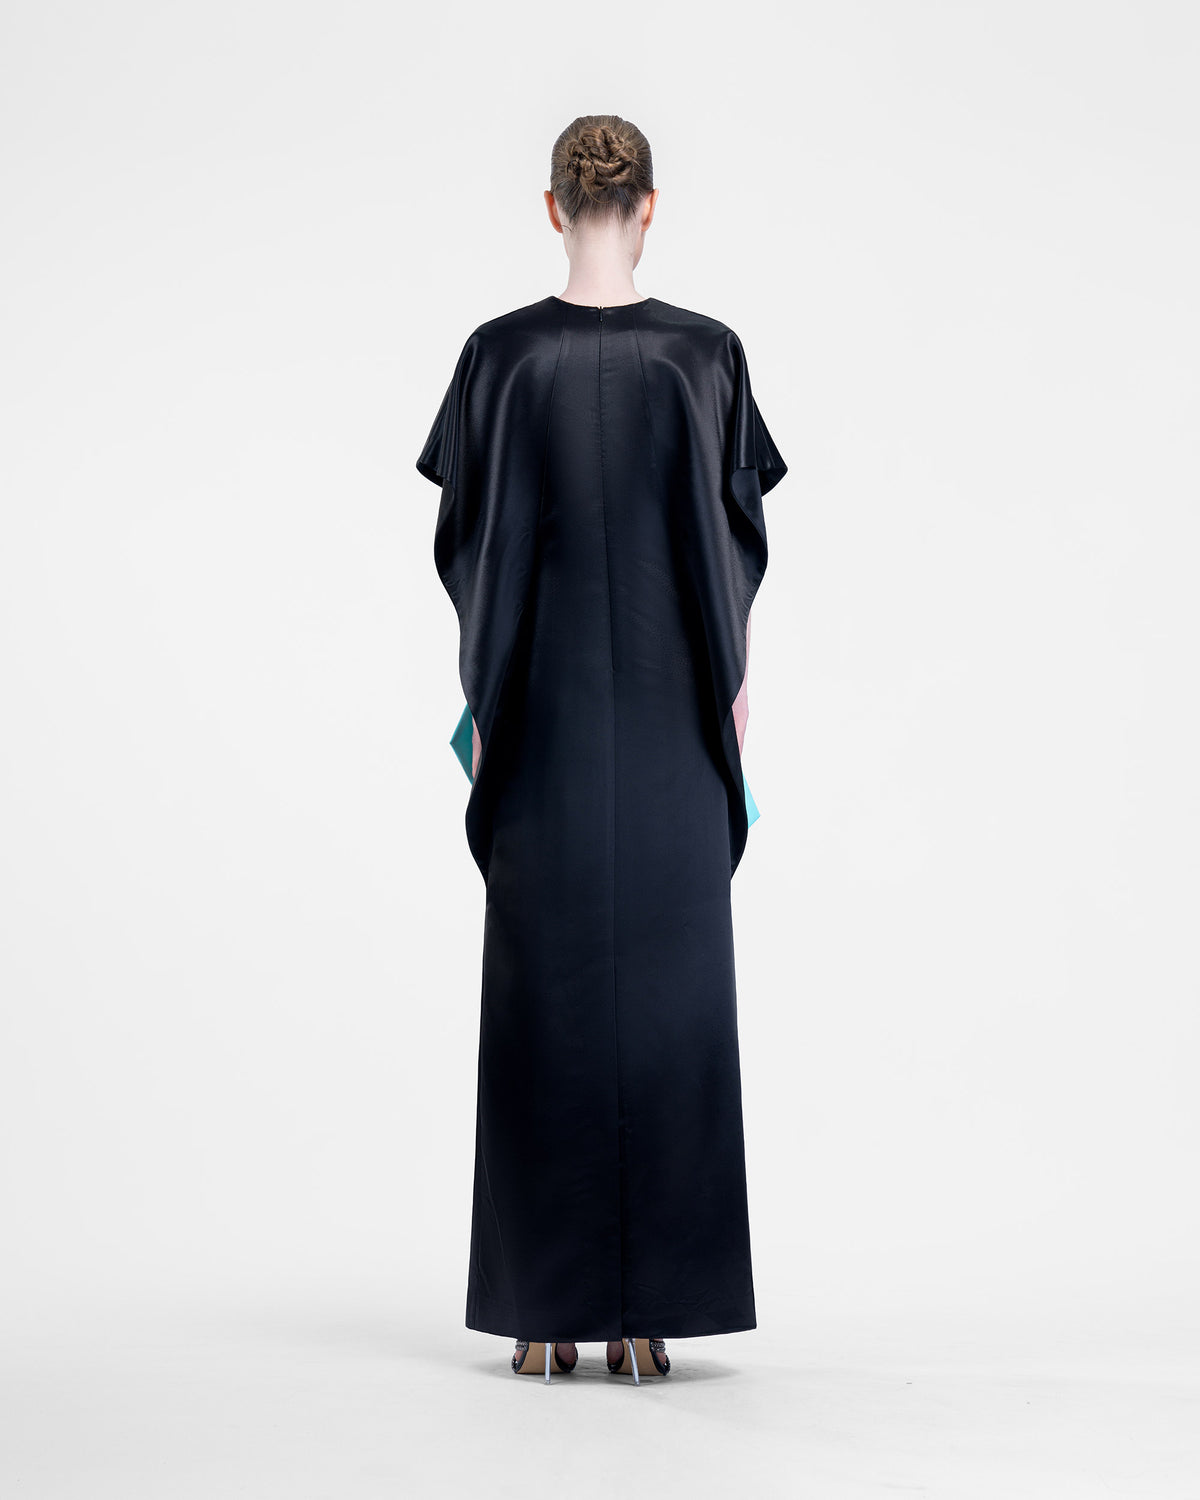 Calla Lily - Cape Sleeves Black Evening Dress